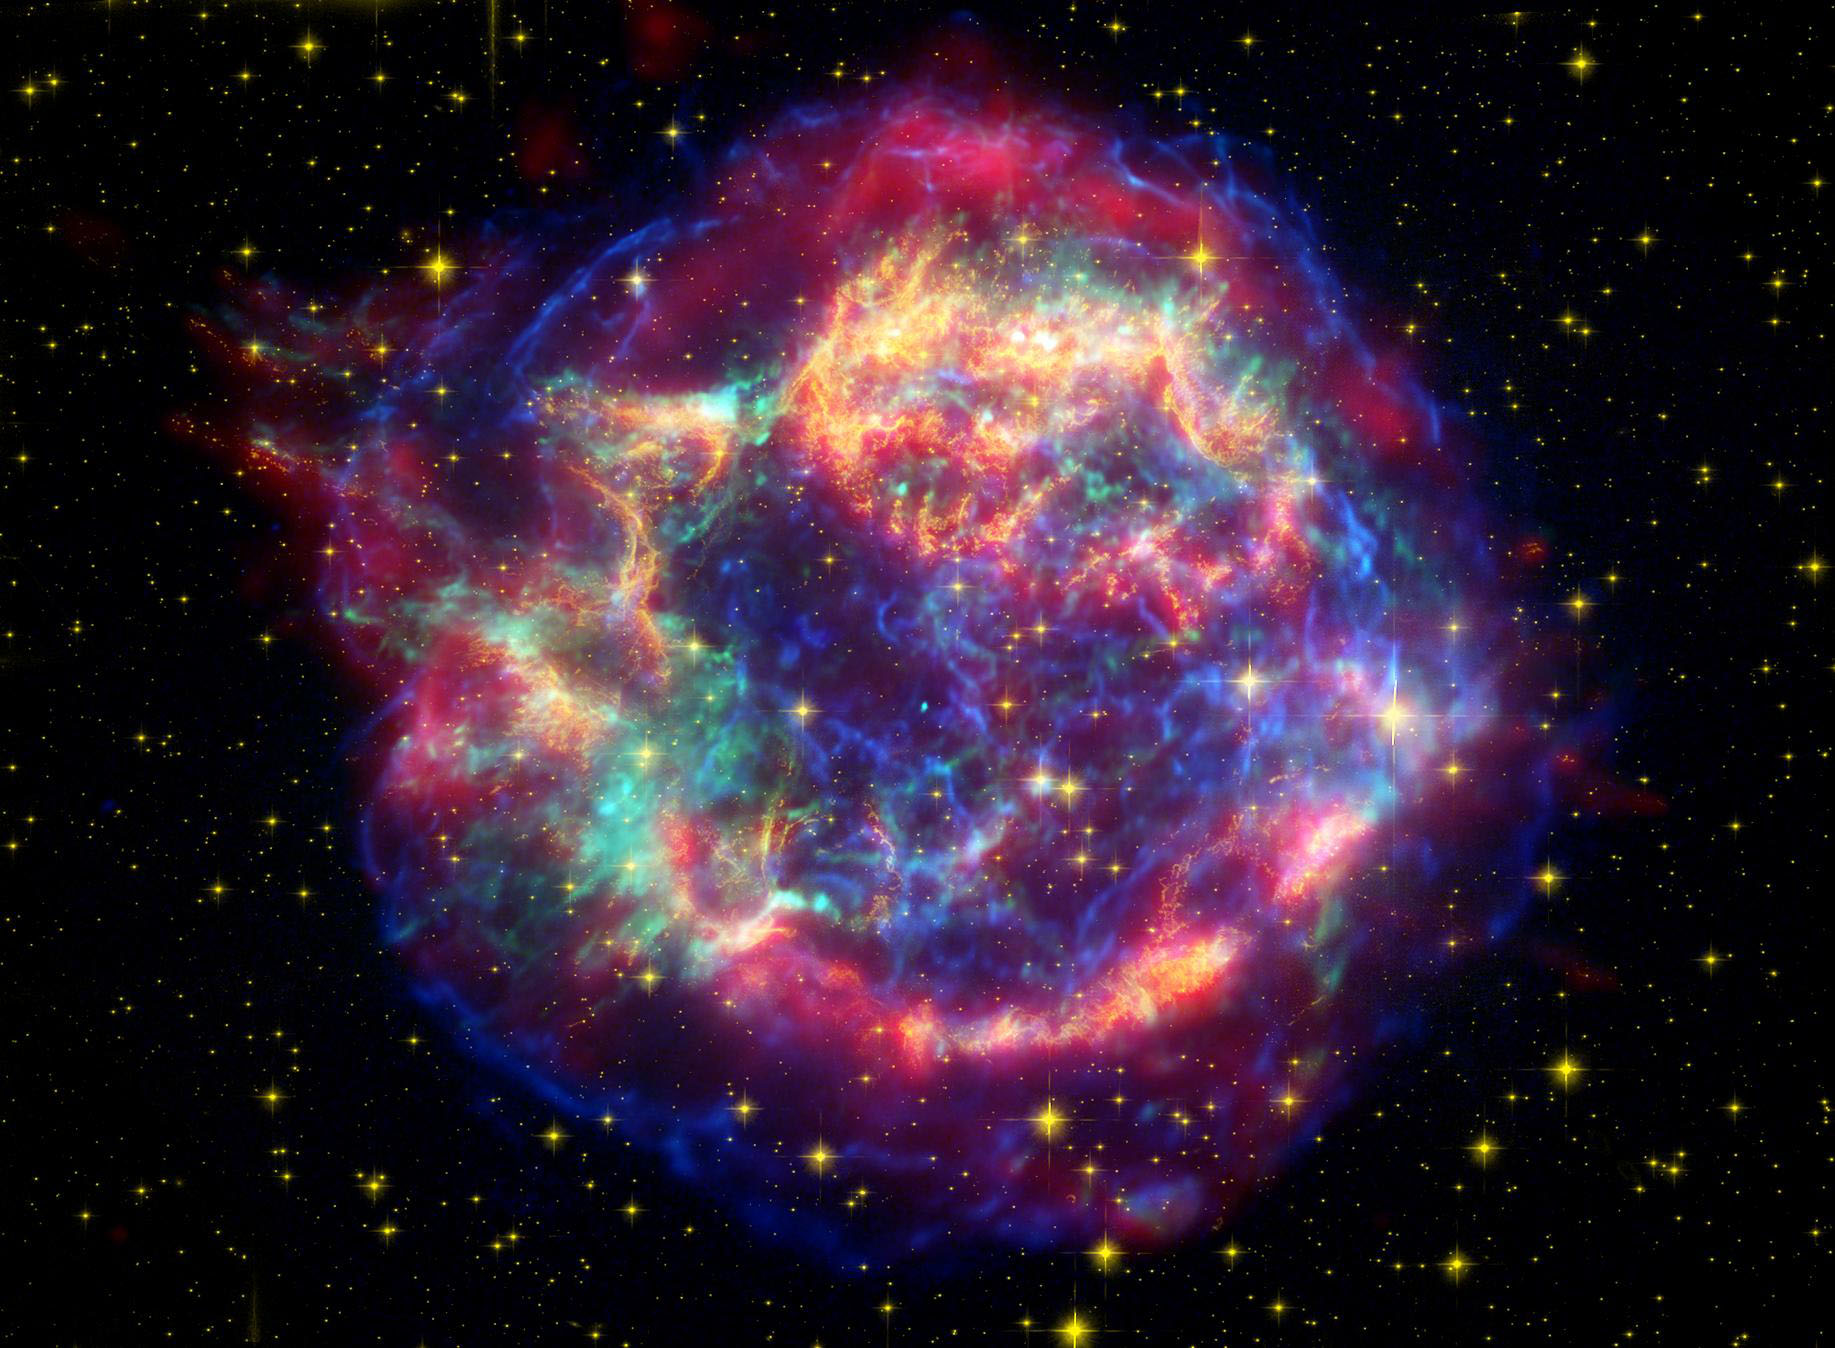 Cassiopeia A, or Cas A, is a supernova remnant located 10,000 light years away in the constellation Cassiopeia, and is the remnant of a once massive star that died in a violent explosion roughly 340 years ago. This image layers infrared, visible, and X-ray data to reveal filamentary structures of dust and gas. Cas A is amongst the 10-percent of supernovae that scientists are able to study closely. CfA's new machine learning project will help to classify thousands, and eventually millions, of potentially interesting supernovae that may otherwise never be studied.